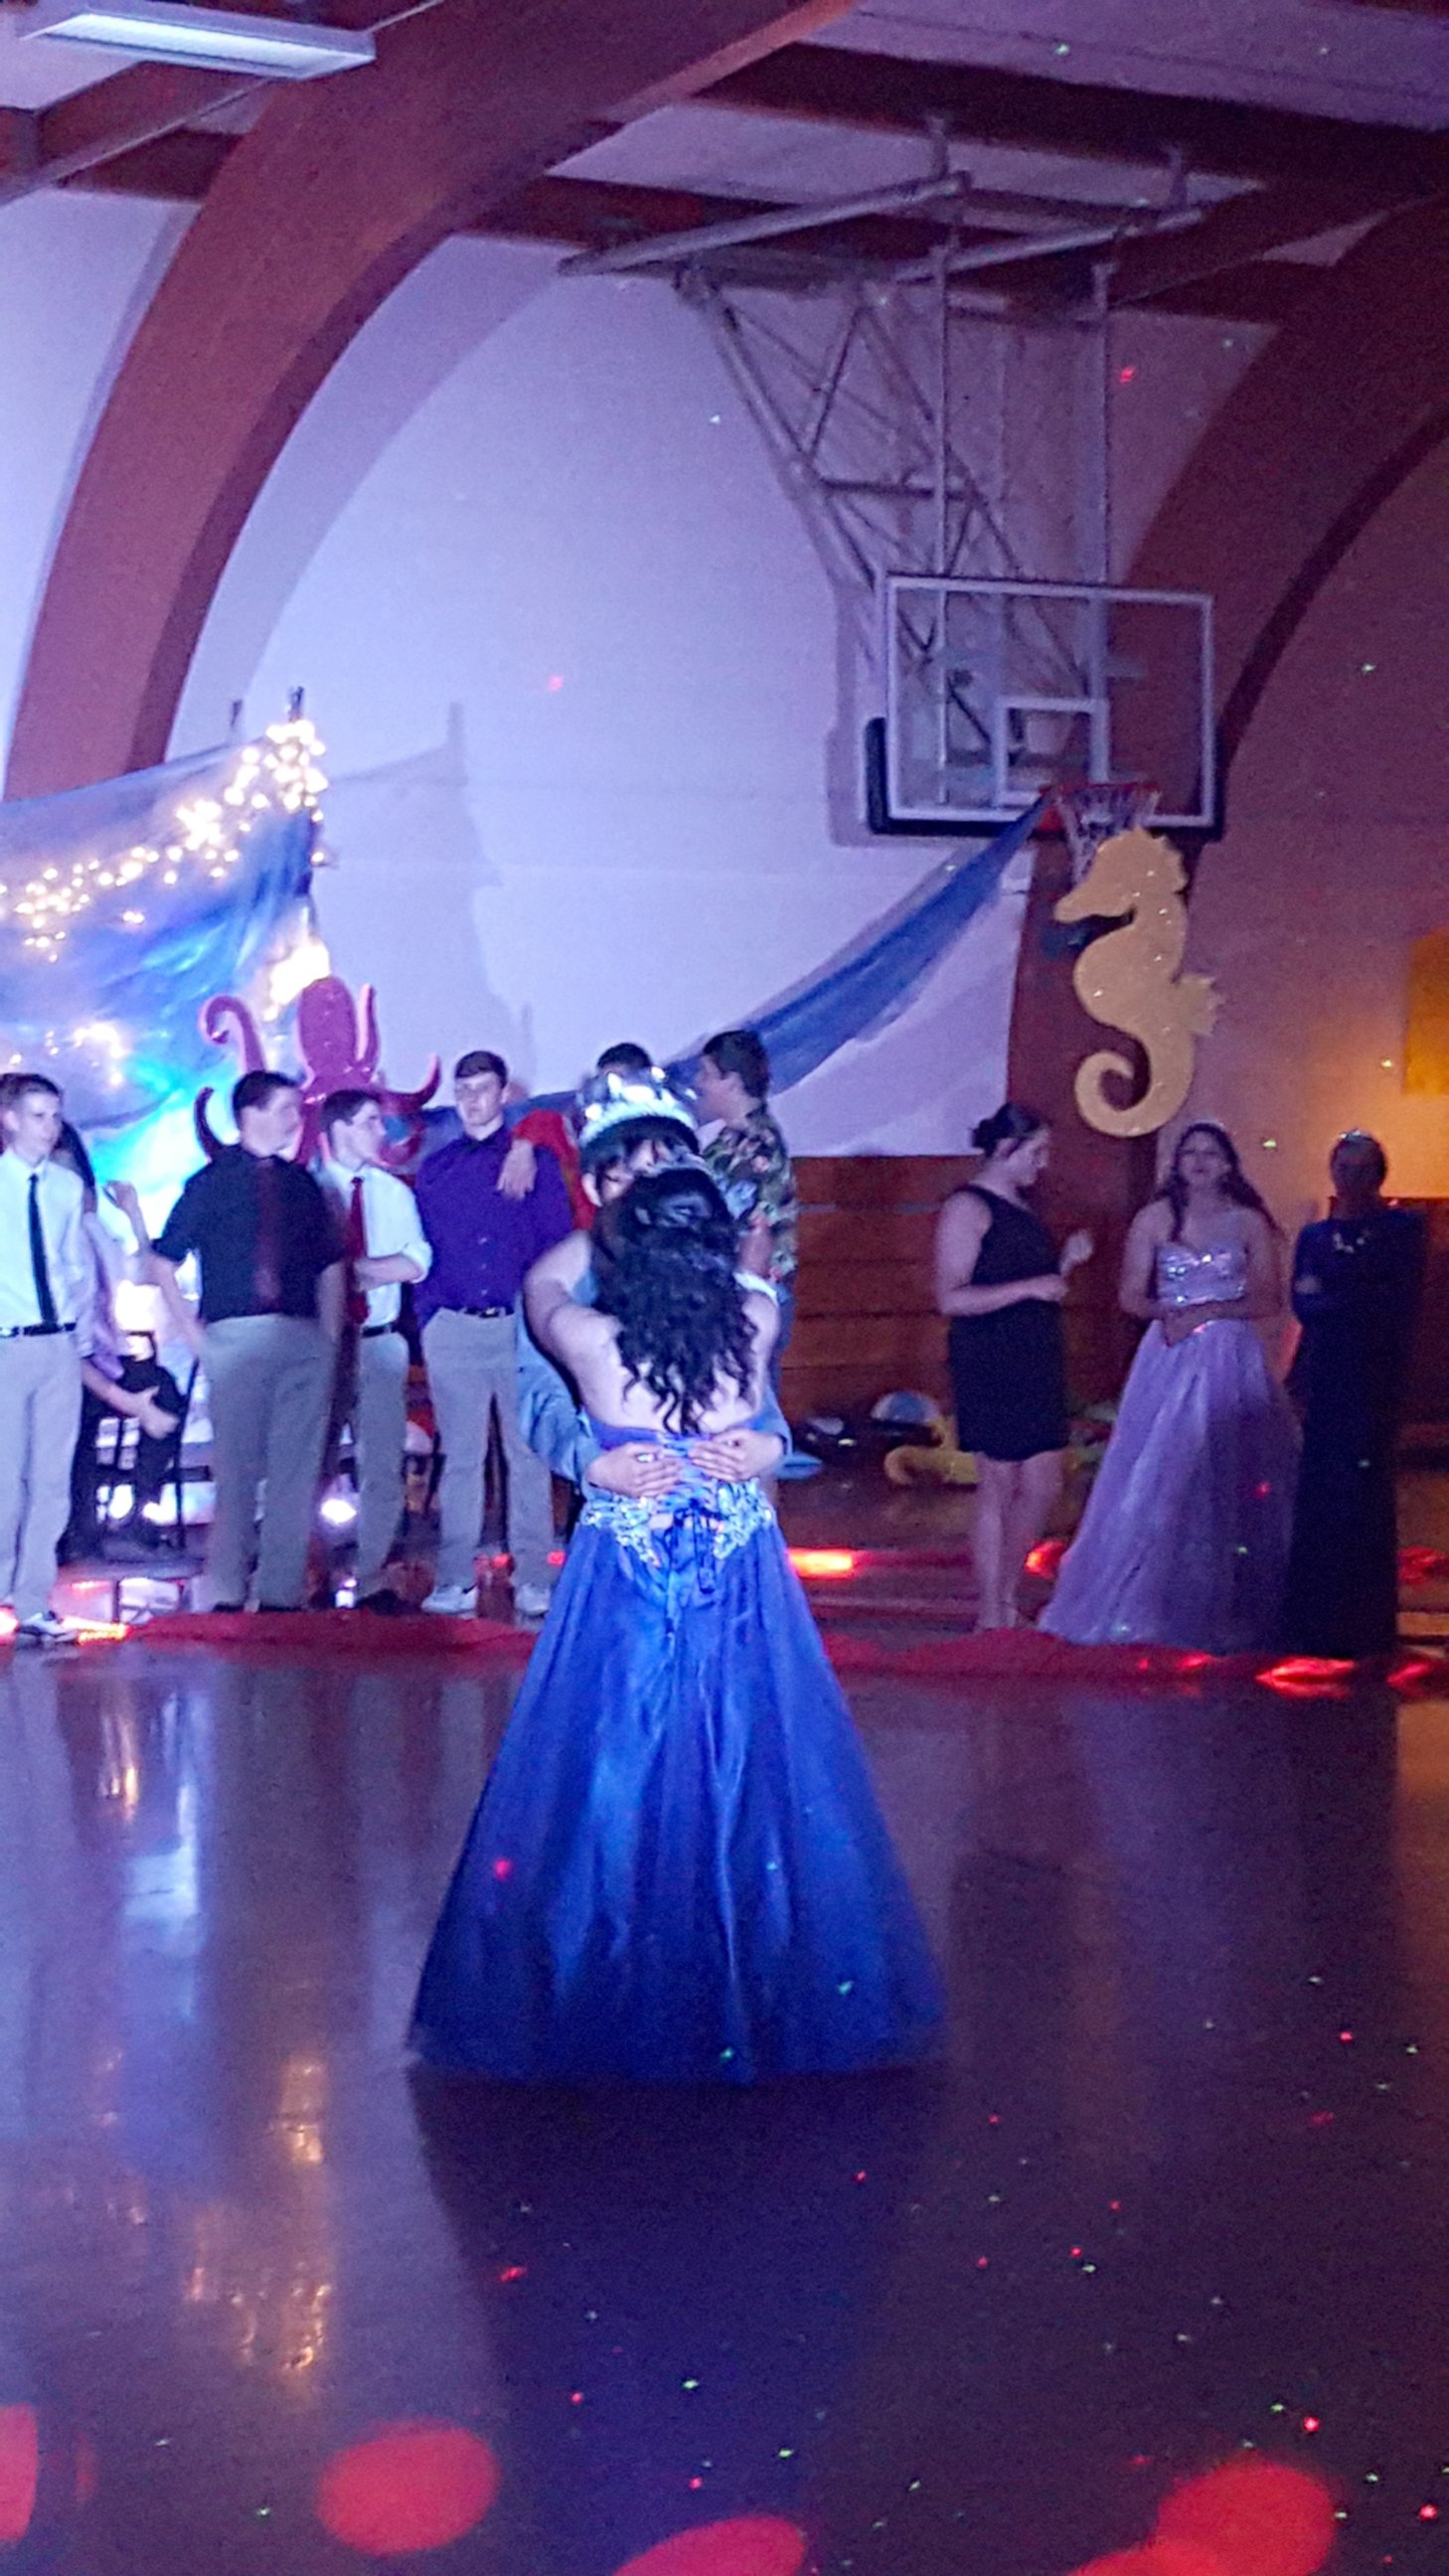 PHOTO: Olivia Pelley has her prom queen and prom king dance at her second prom.